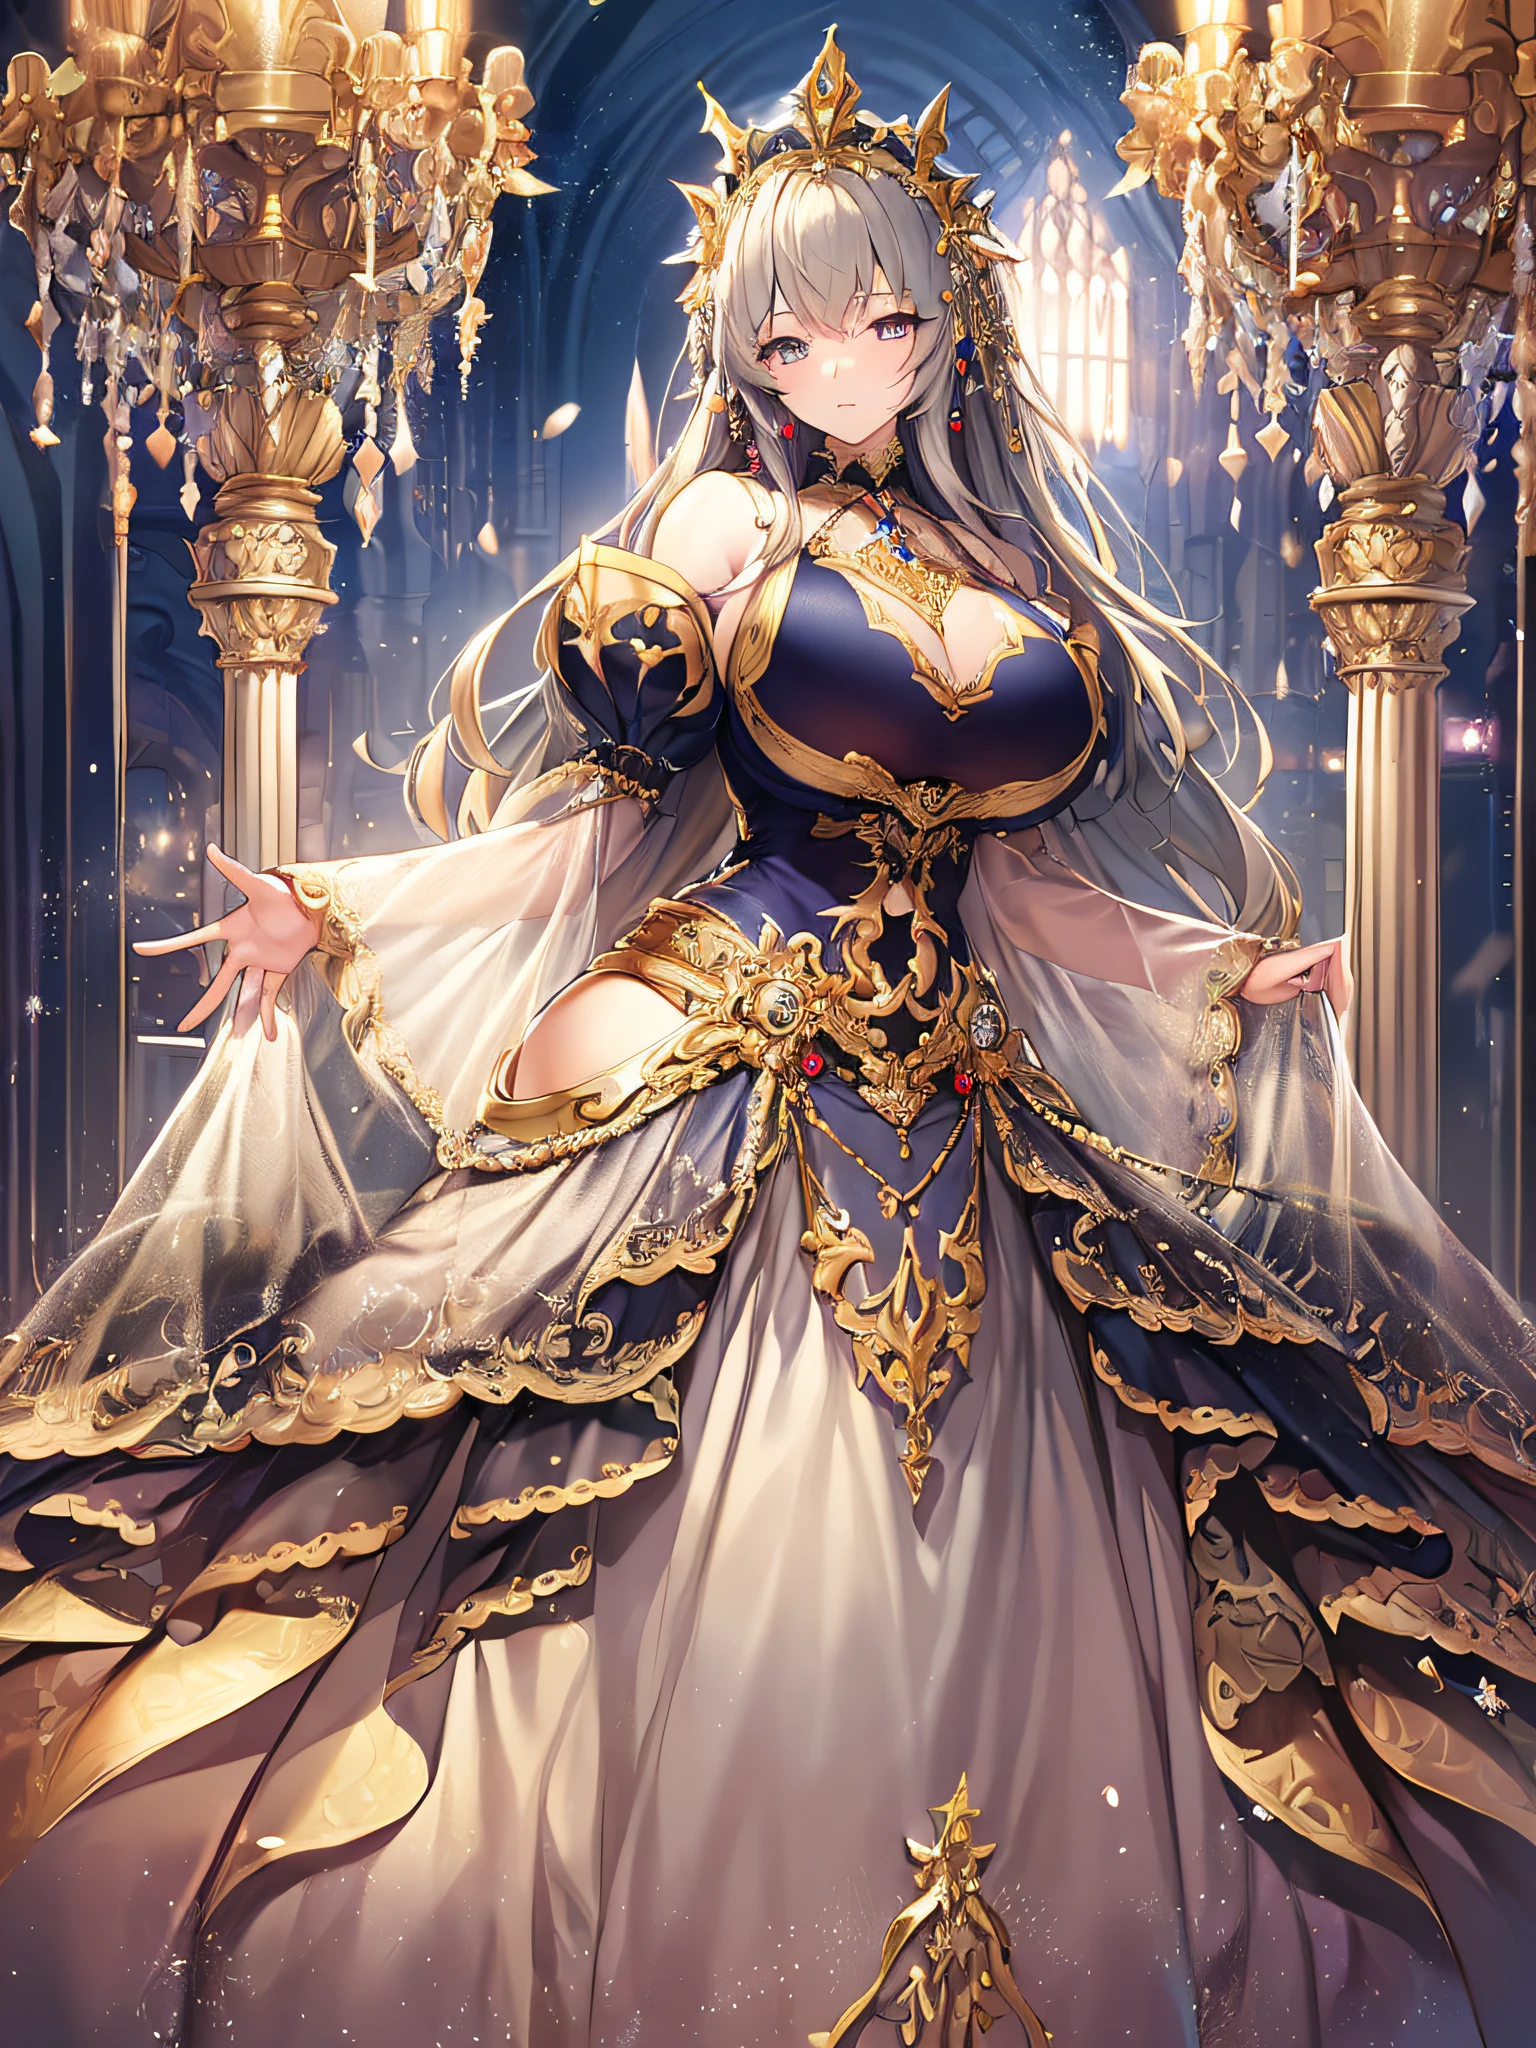 ((anime moe artstyle)),(Masterpiece),(Best Quality), (Super Detail),Illustration,((Very Delicate and Beautiful)),Focus on character,Dynamic Angle,Looking at viewer,((Solo)),standing,(((full body))),(((one noble princess in gorgeous ball gown with voluminous skirt))),detailed face and eyes,jewel-like eyes,((Very Long voluminous Hair)),gorgeous embroidery and lace,See-through,ornate ruffles,Gorgeous jewelry ornaments,(gigantic breasts,Long breasts),((gorgeous ball gown with voluminous skirt)),full body